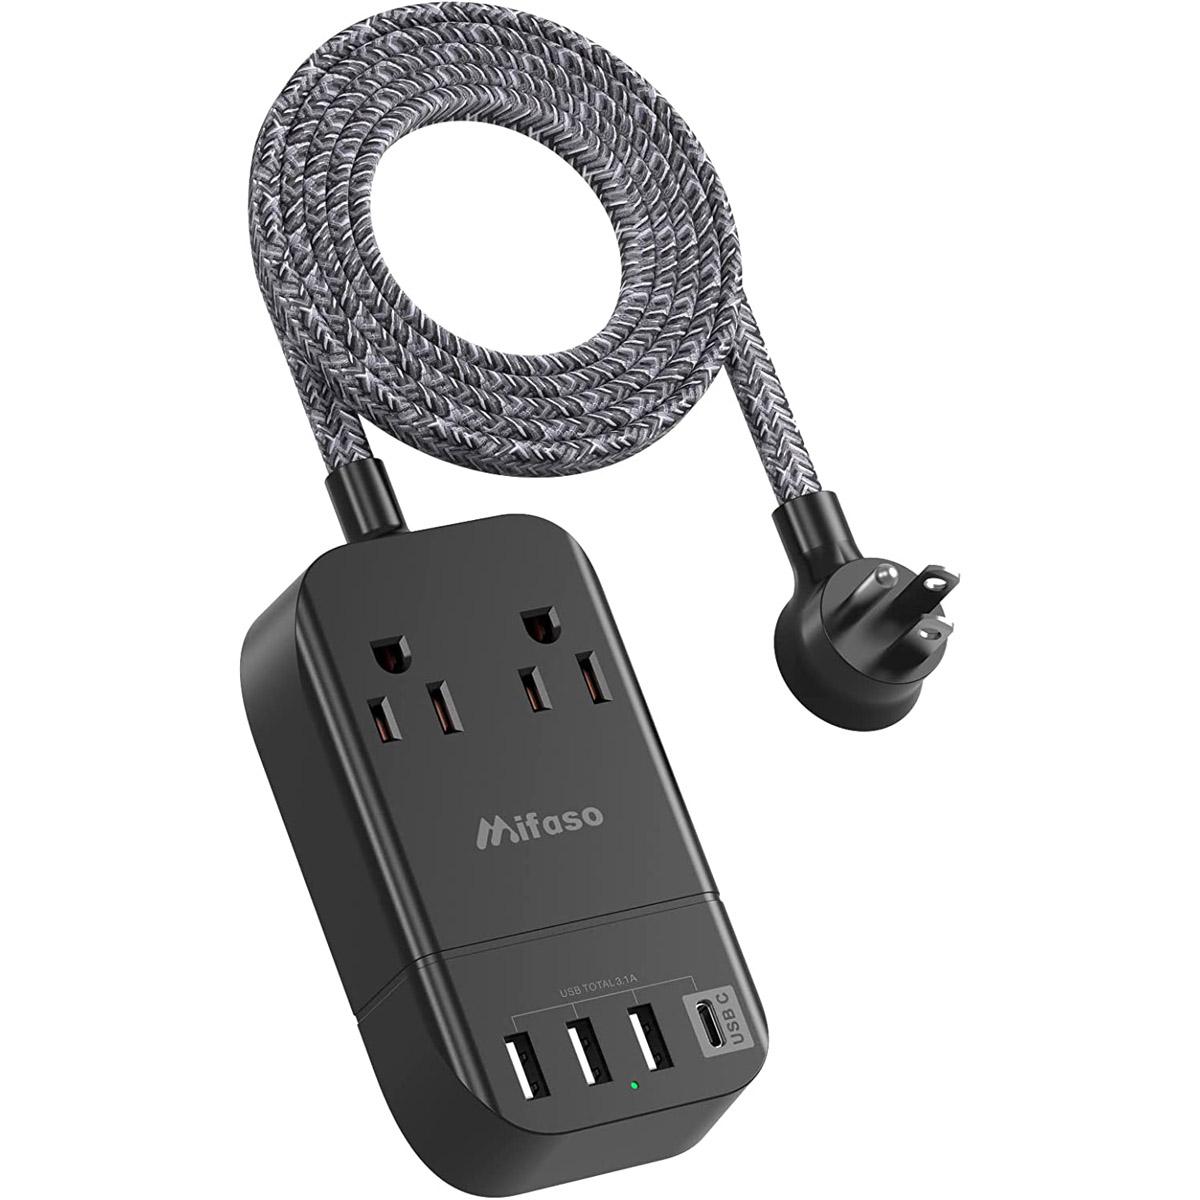 Mifaso 2 AC Outlet Extender with 4 USB Ports for $9.95